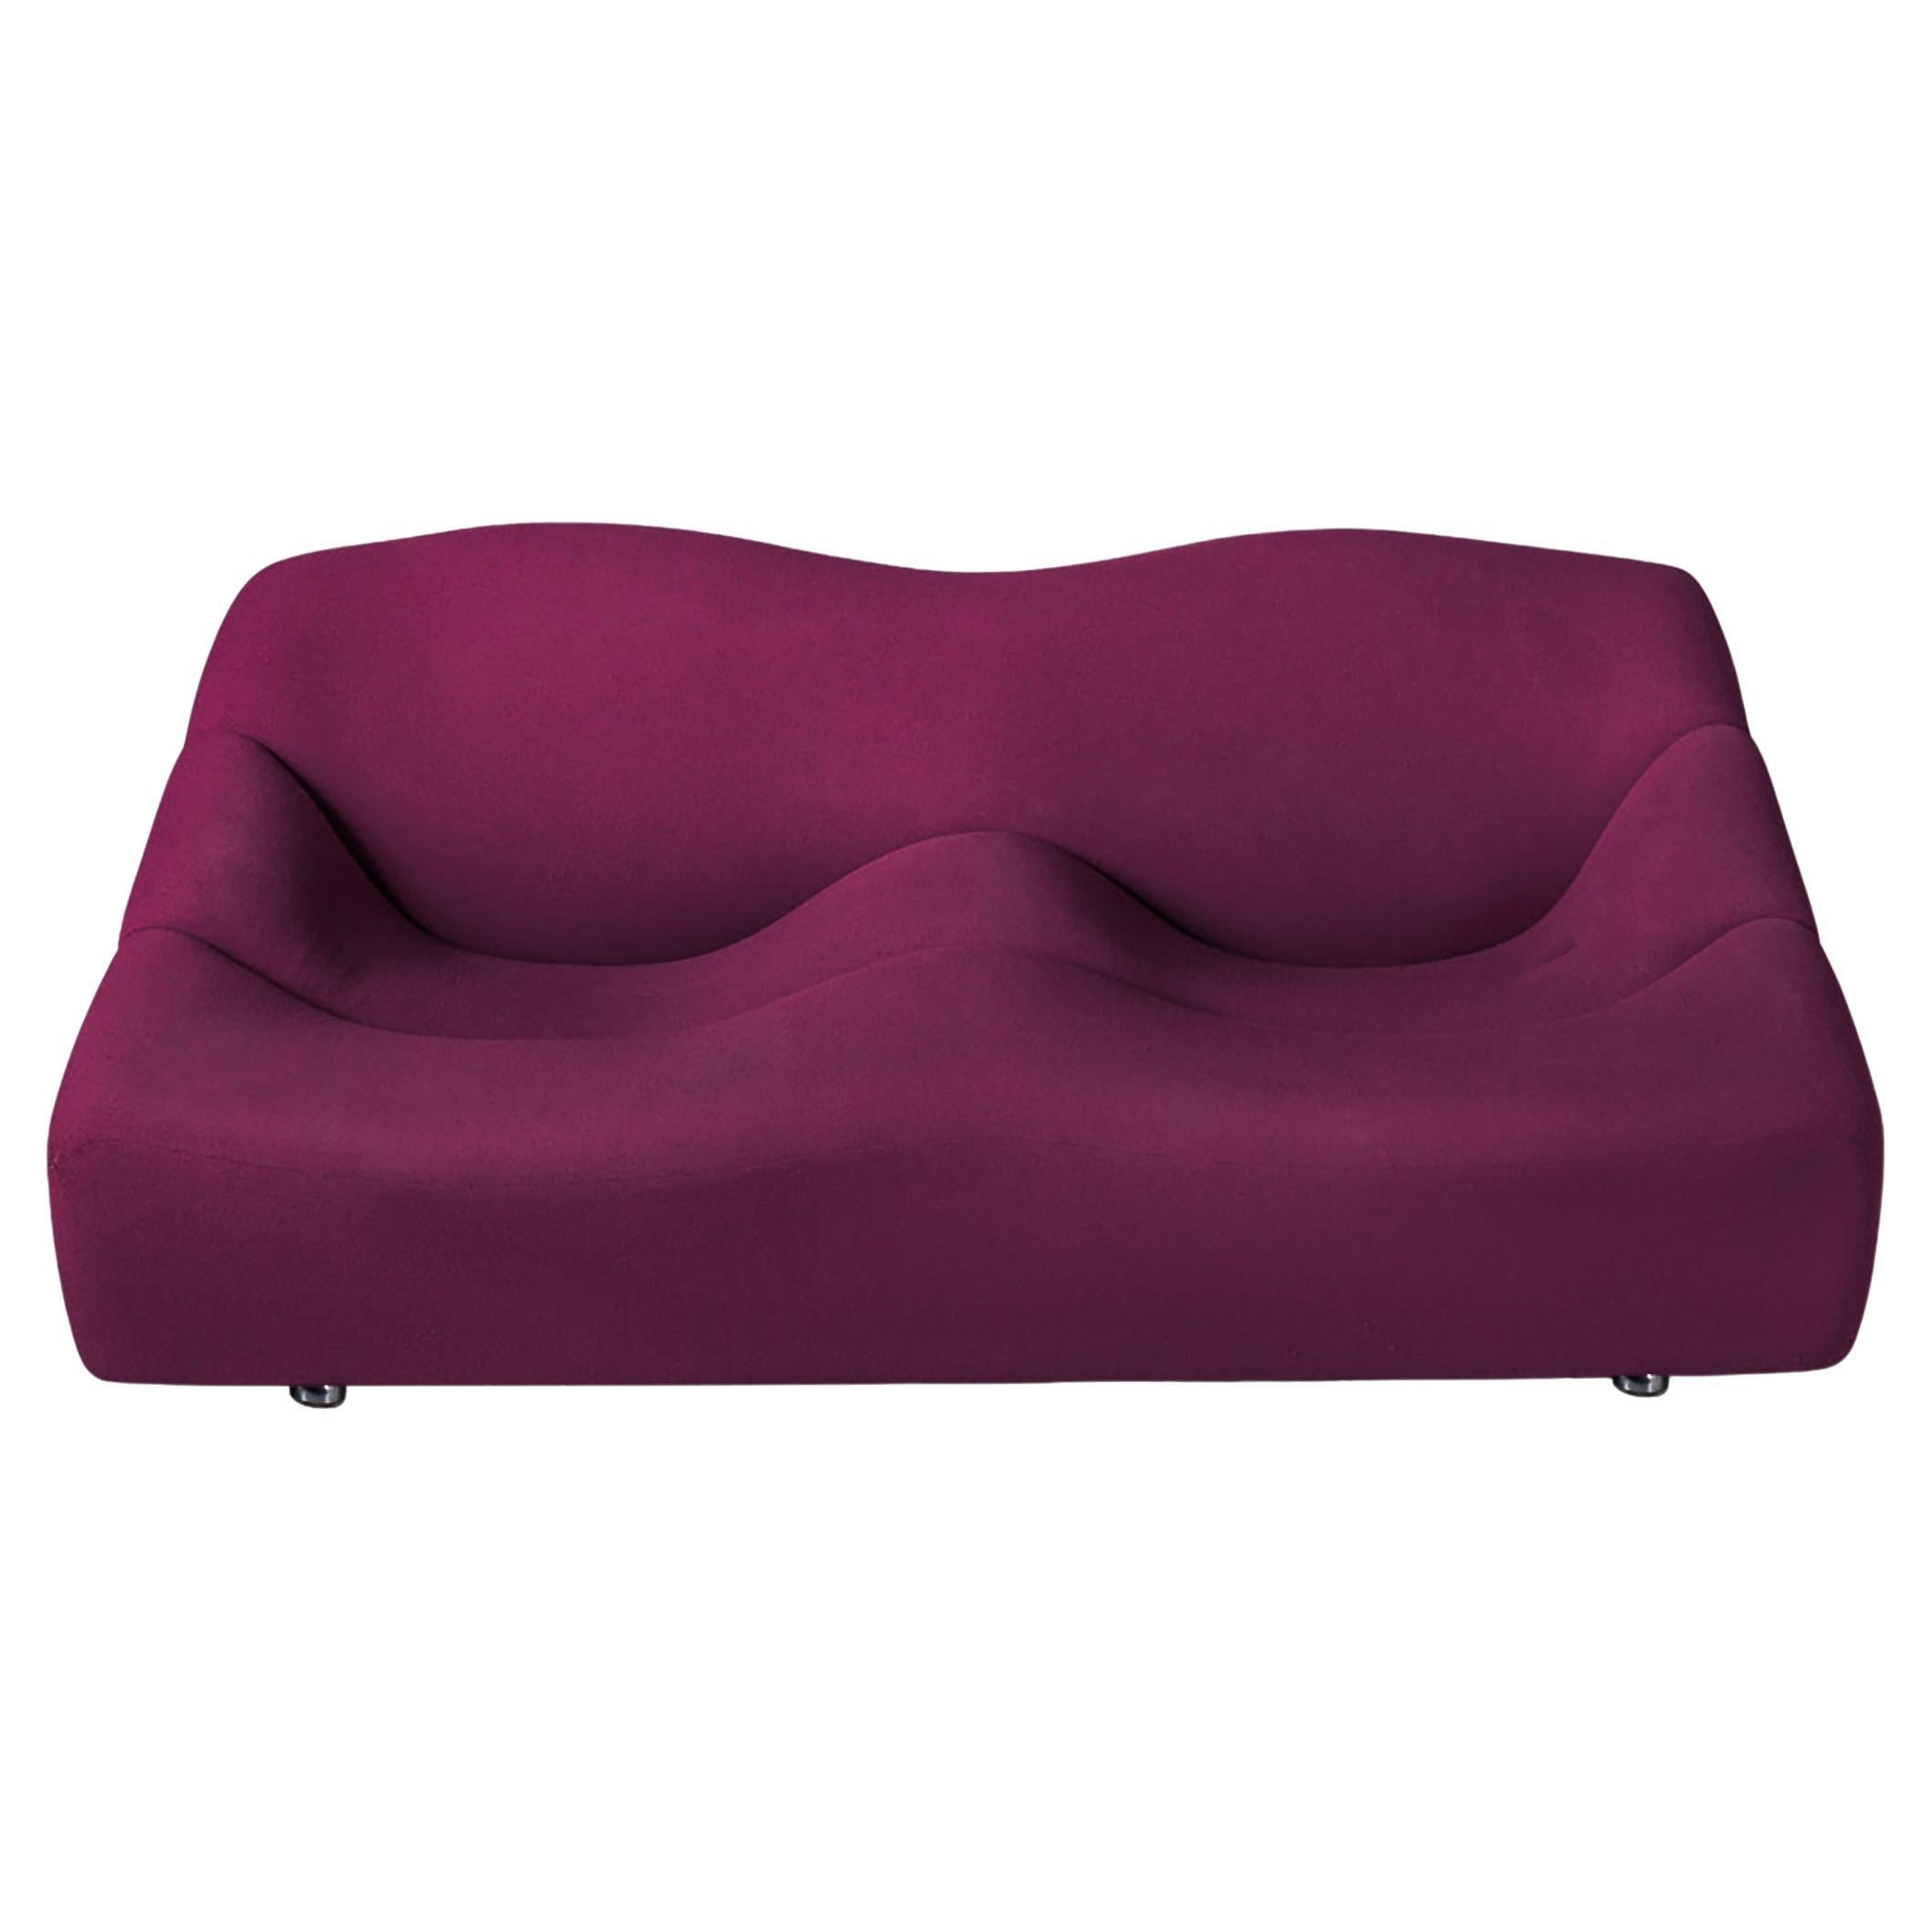 Pierre Paulin for Artifort ´ABCD´ Two Seat Sofa in Purple Upholstery 